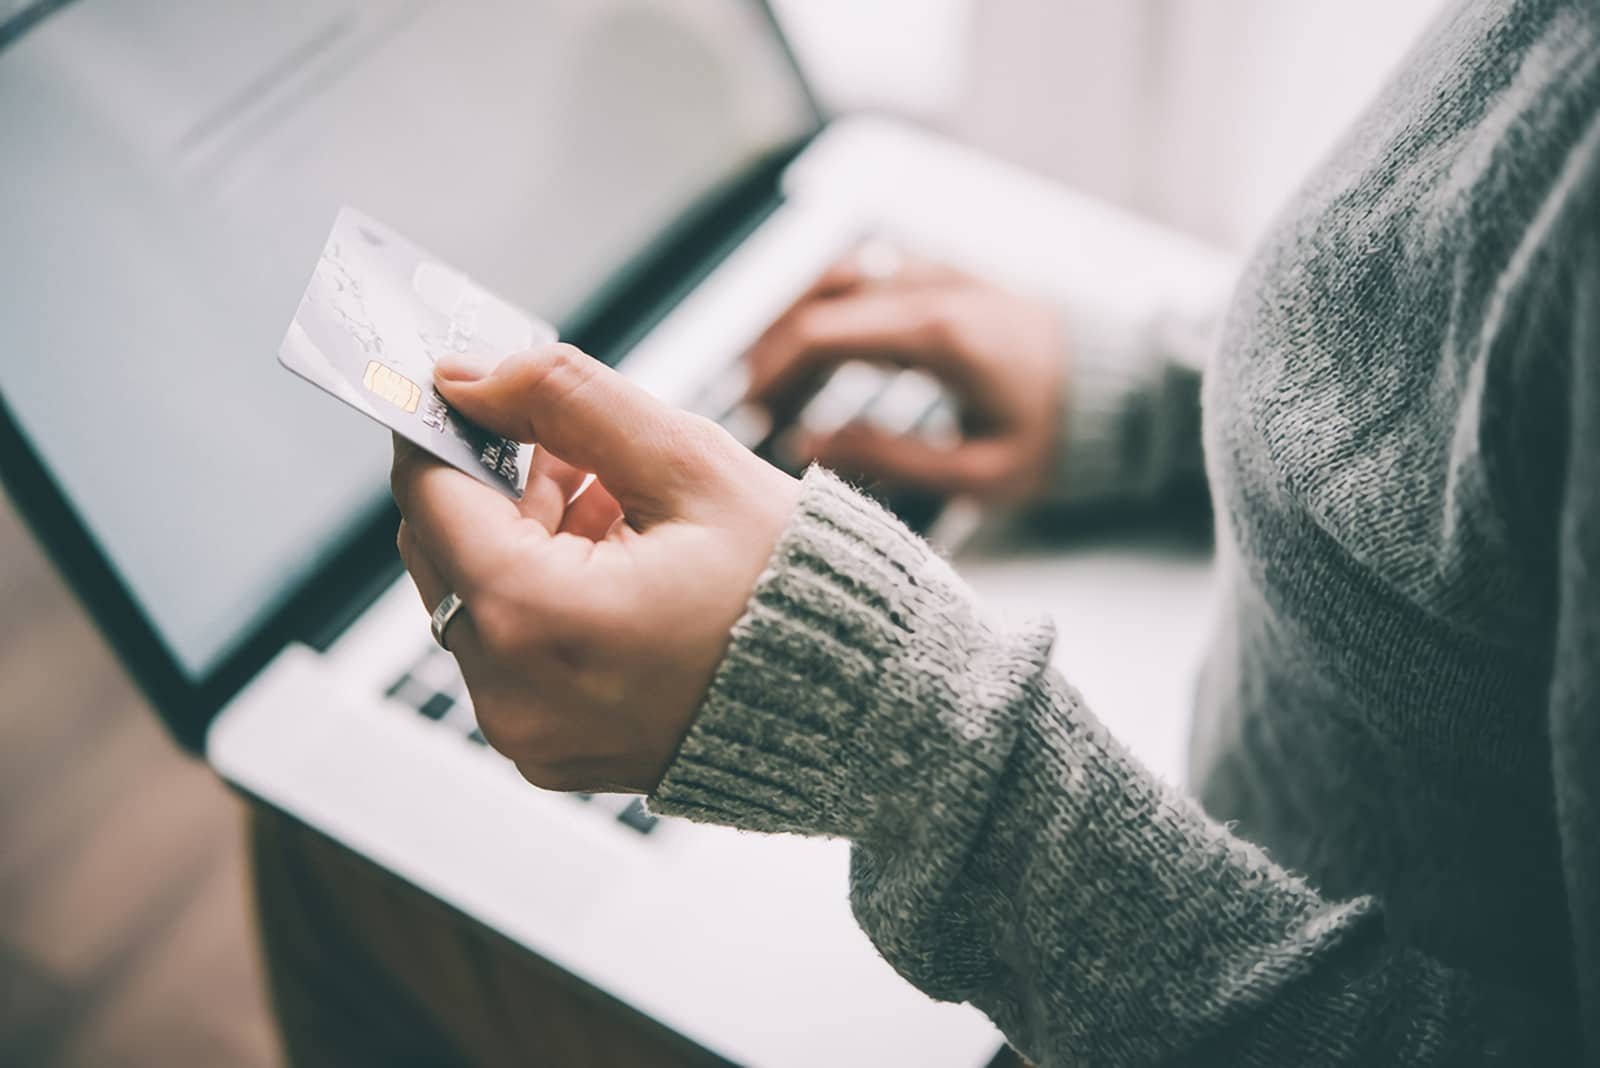 The pros and cons of credit cards